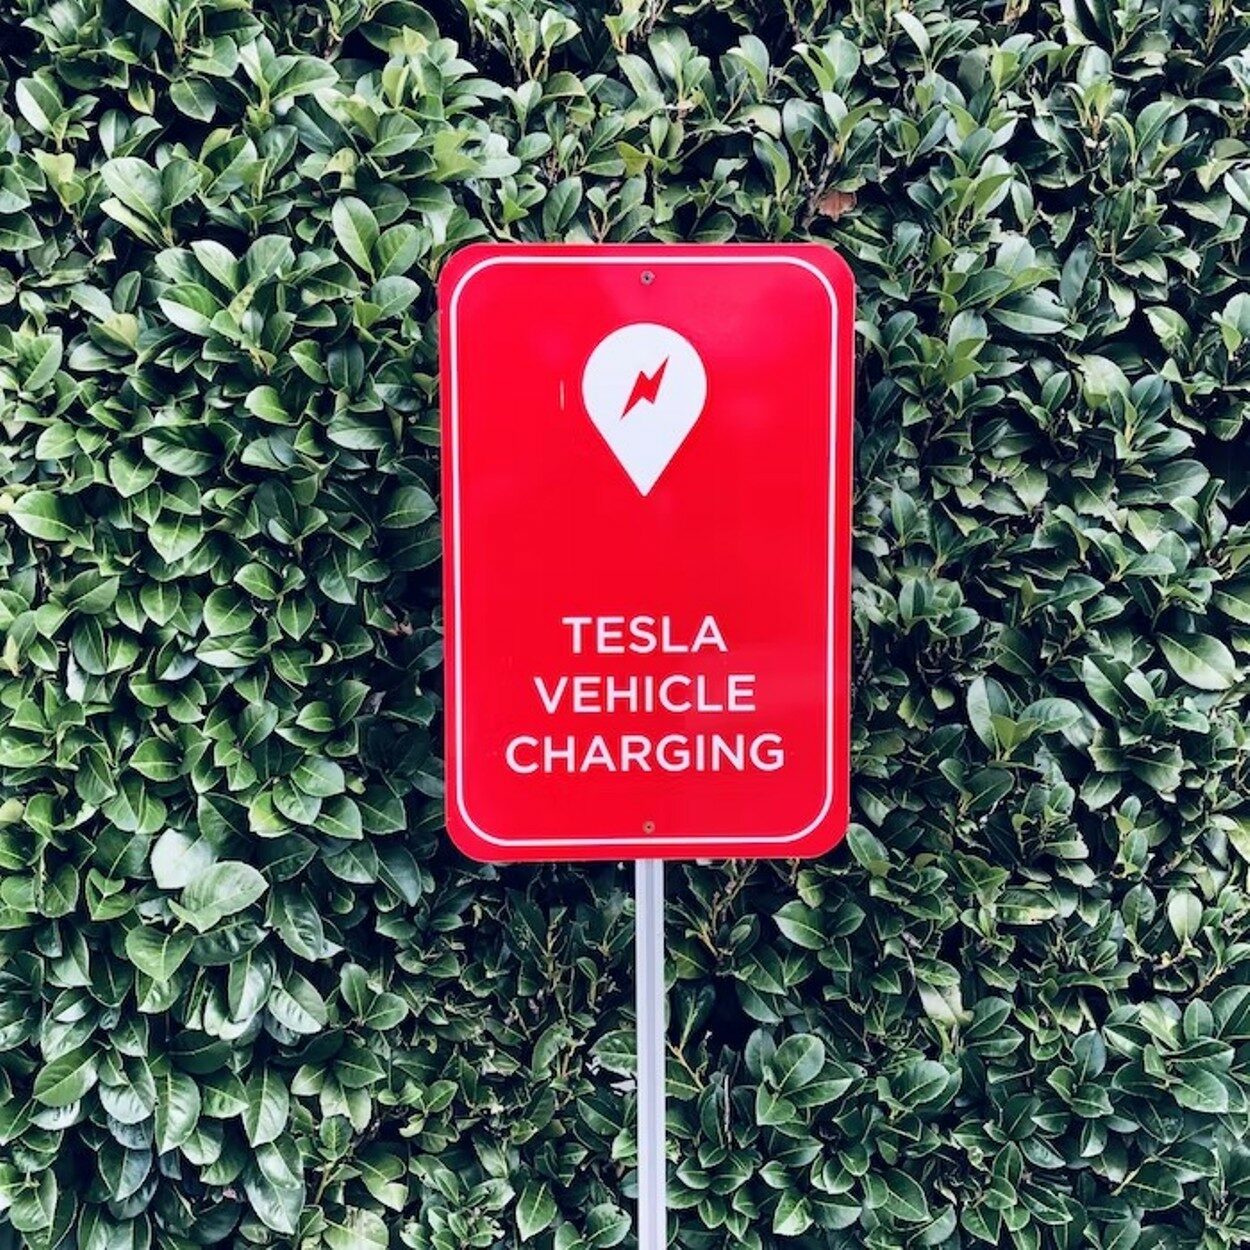 A sign board showing the tesla charging logo